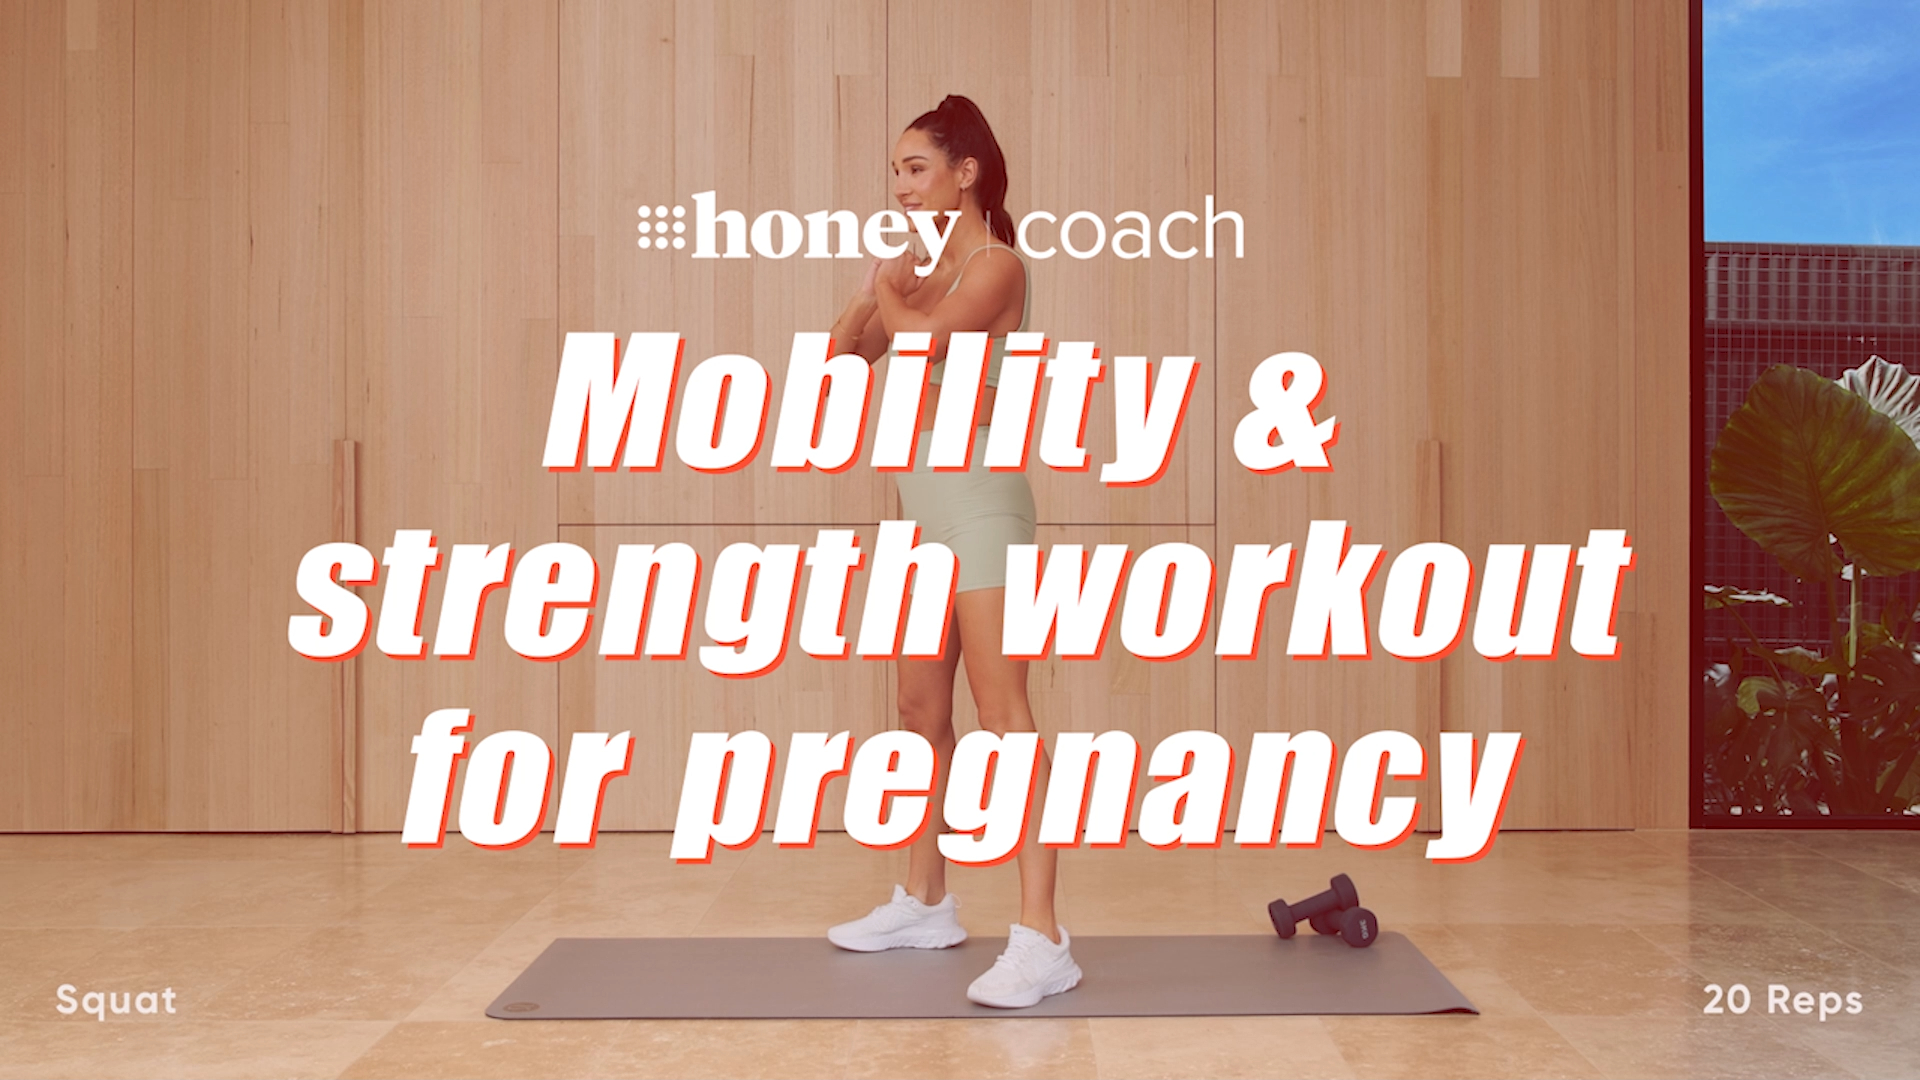 Kayla Itsines shares a pregnancy-friendly mobility and strength workout